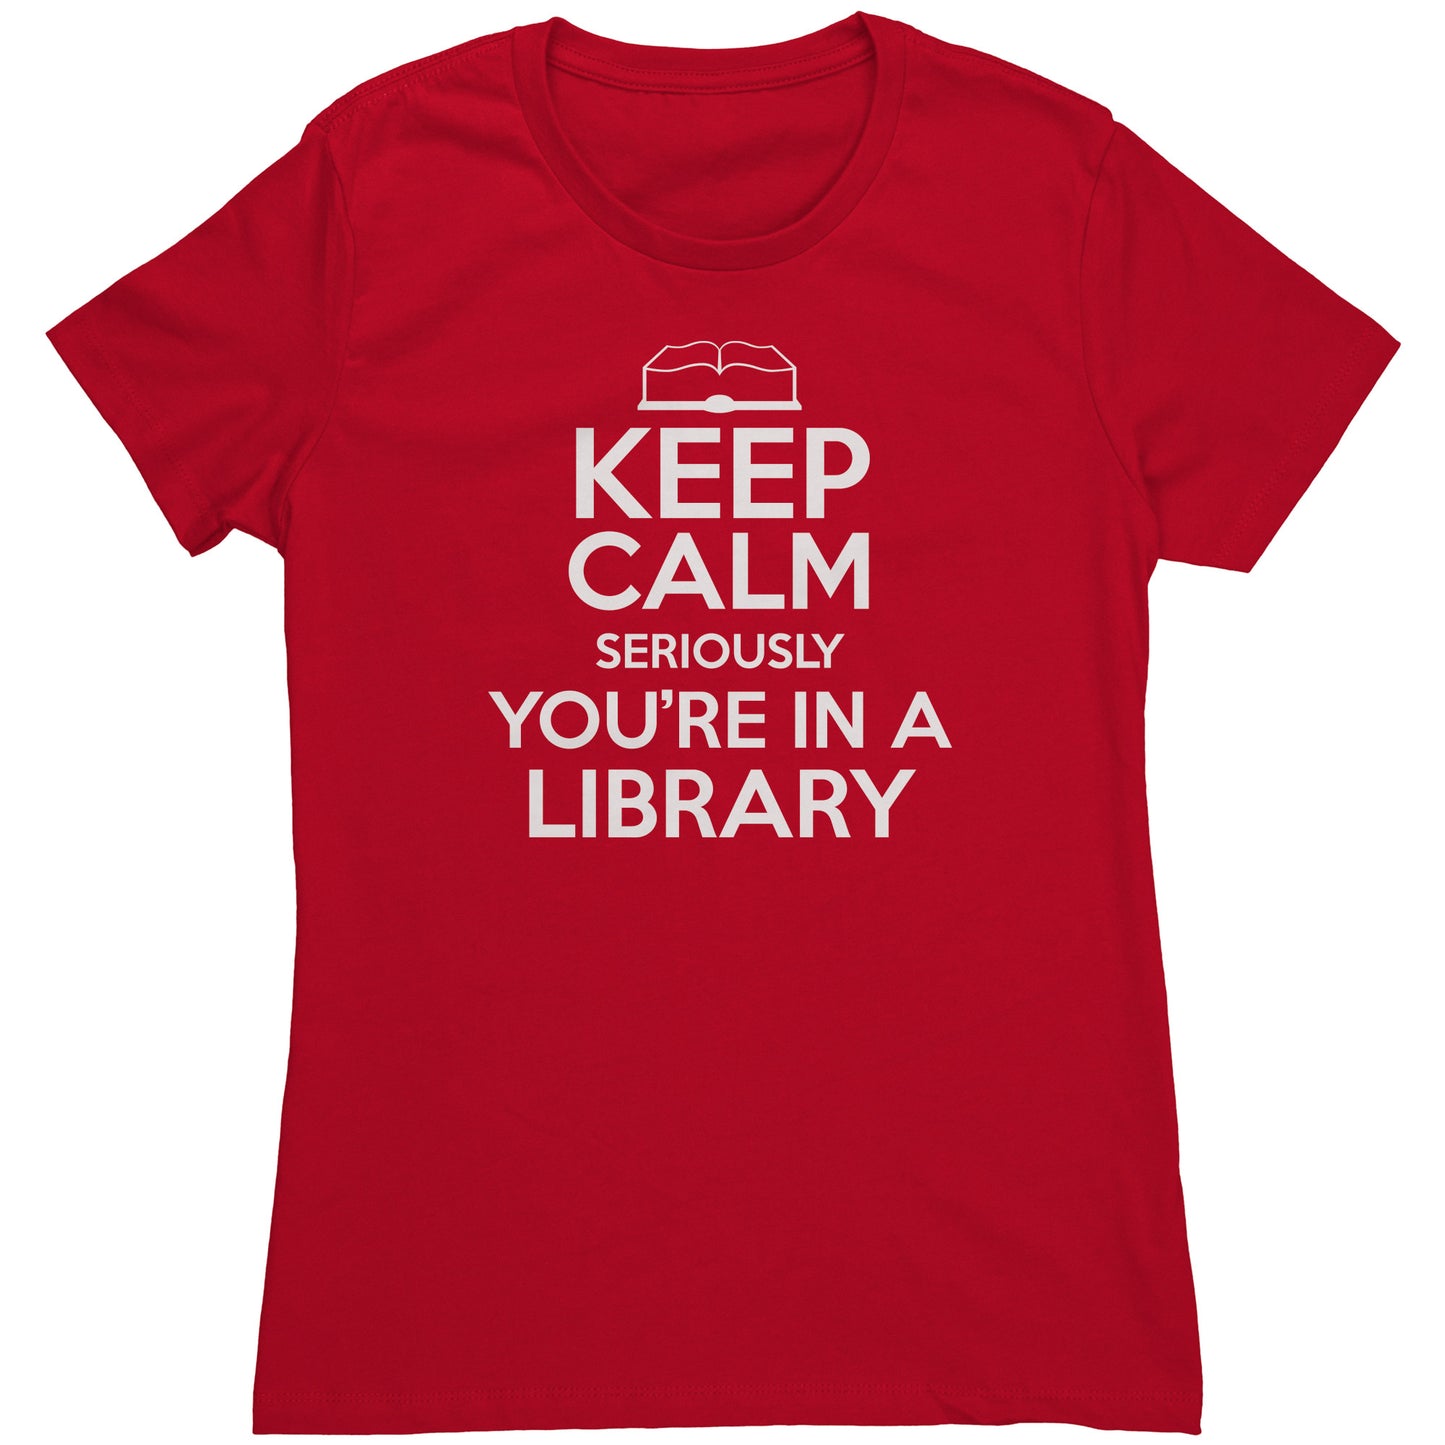 Keep Calm Seriously You're In A Library | Women's T-Shirt